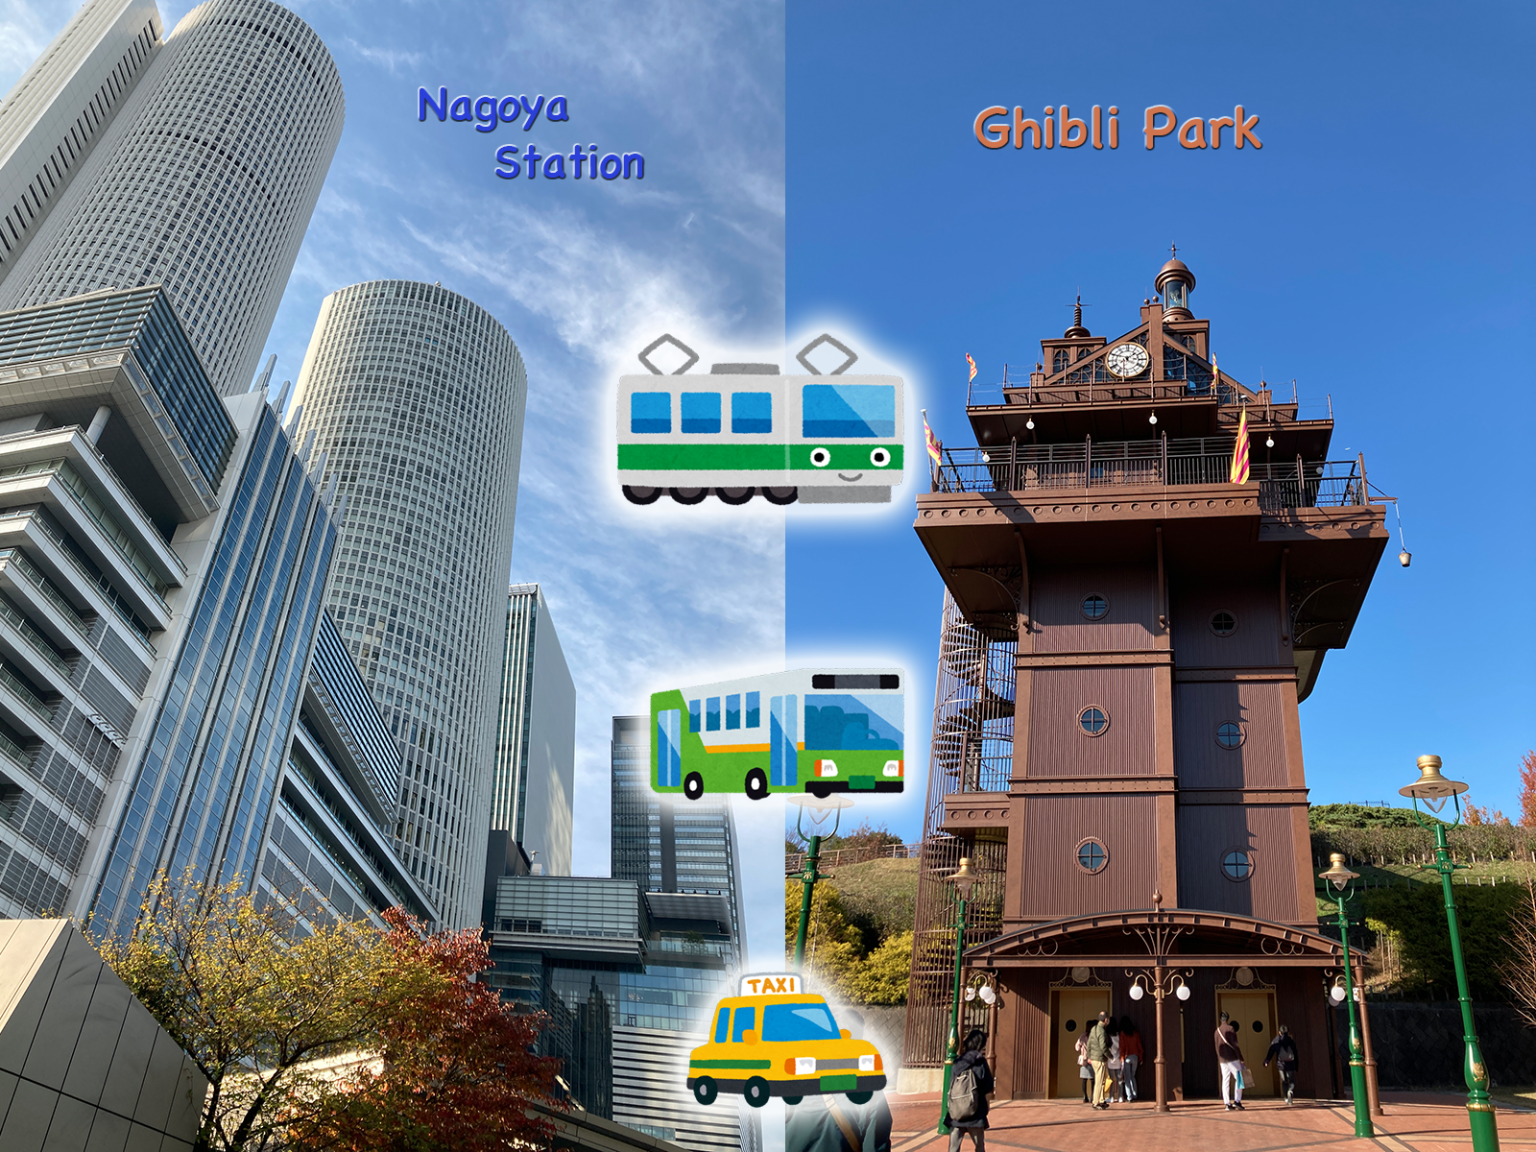 3 recommended ways to get to Ghibli Park from Nagoya Station